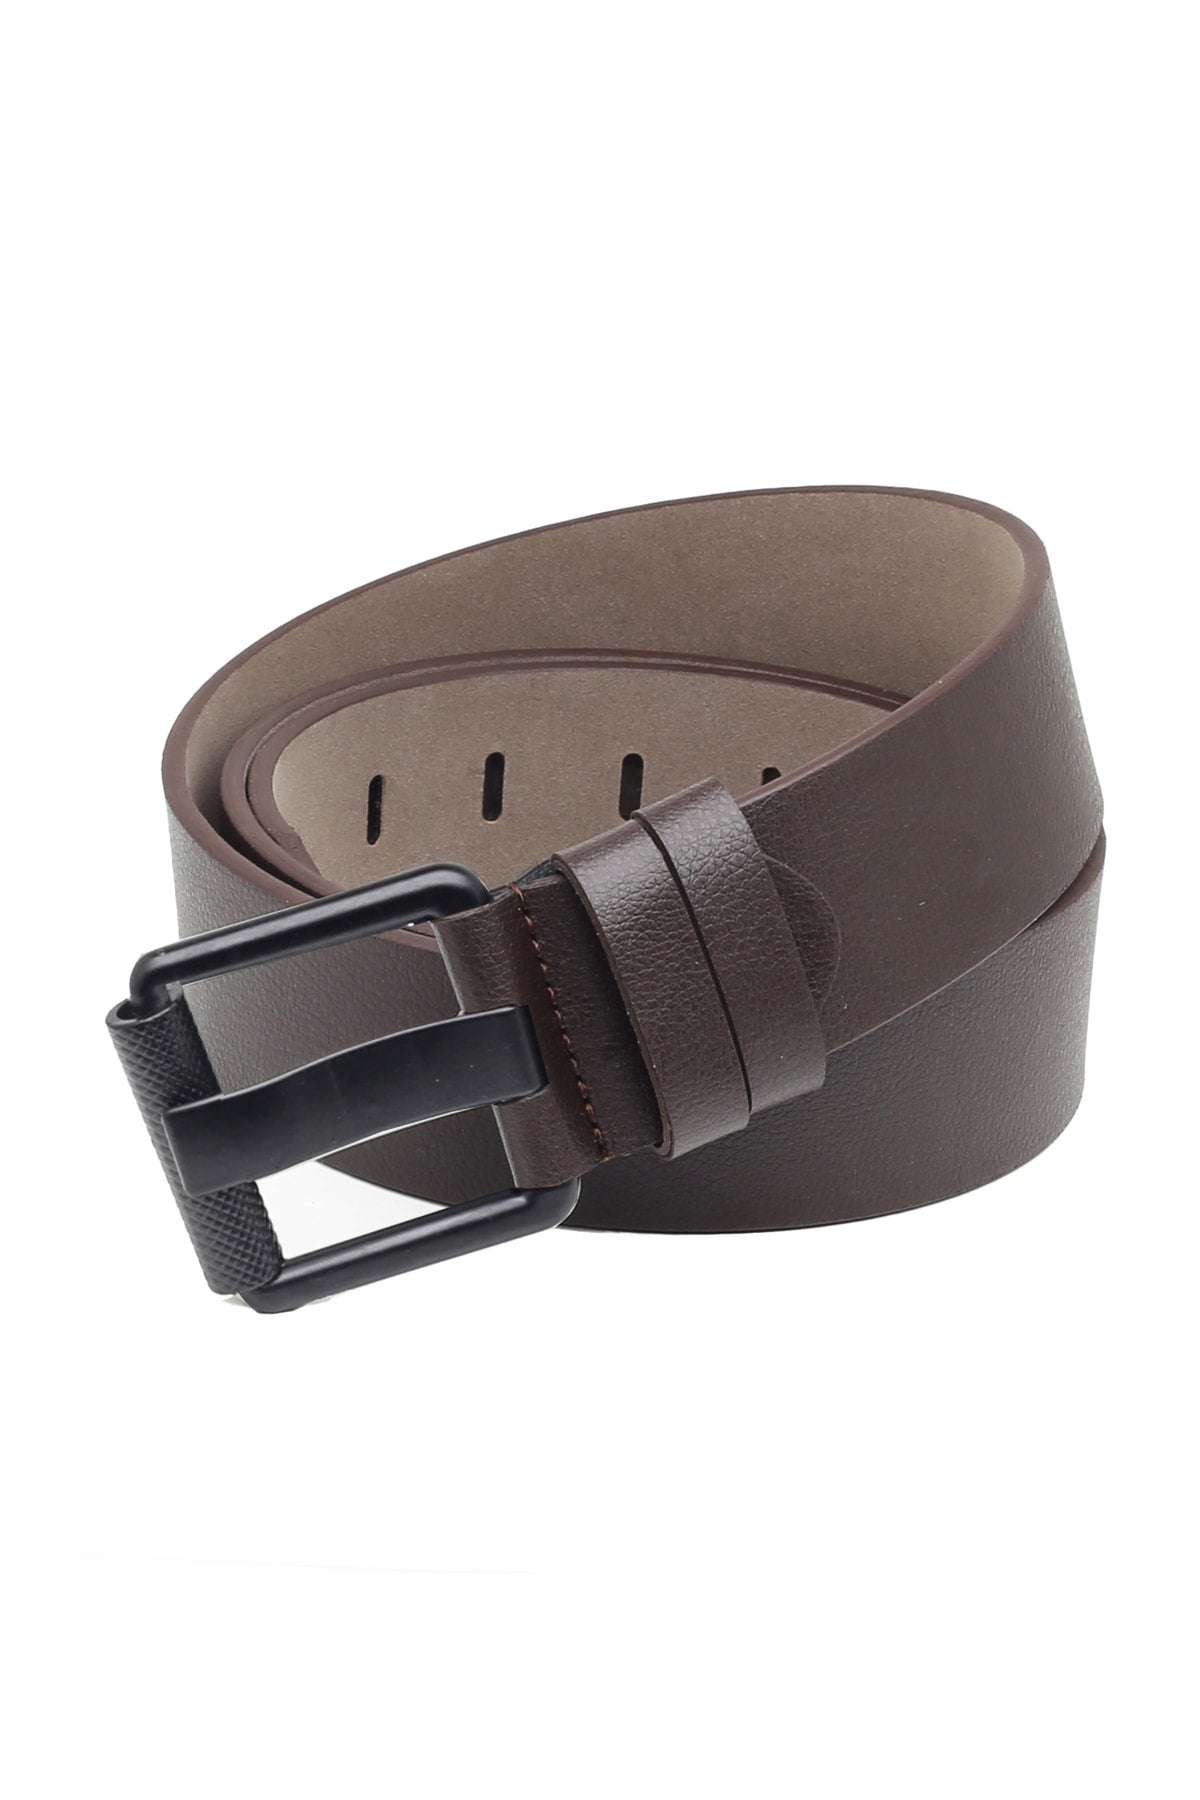 Men's Belt For Jeans And Canvas